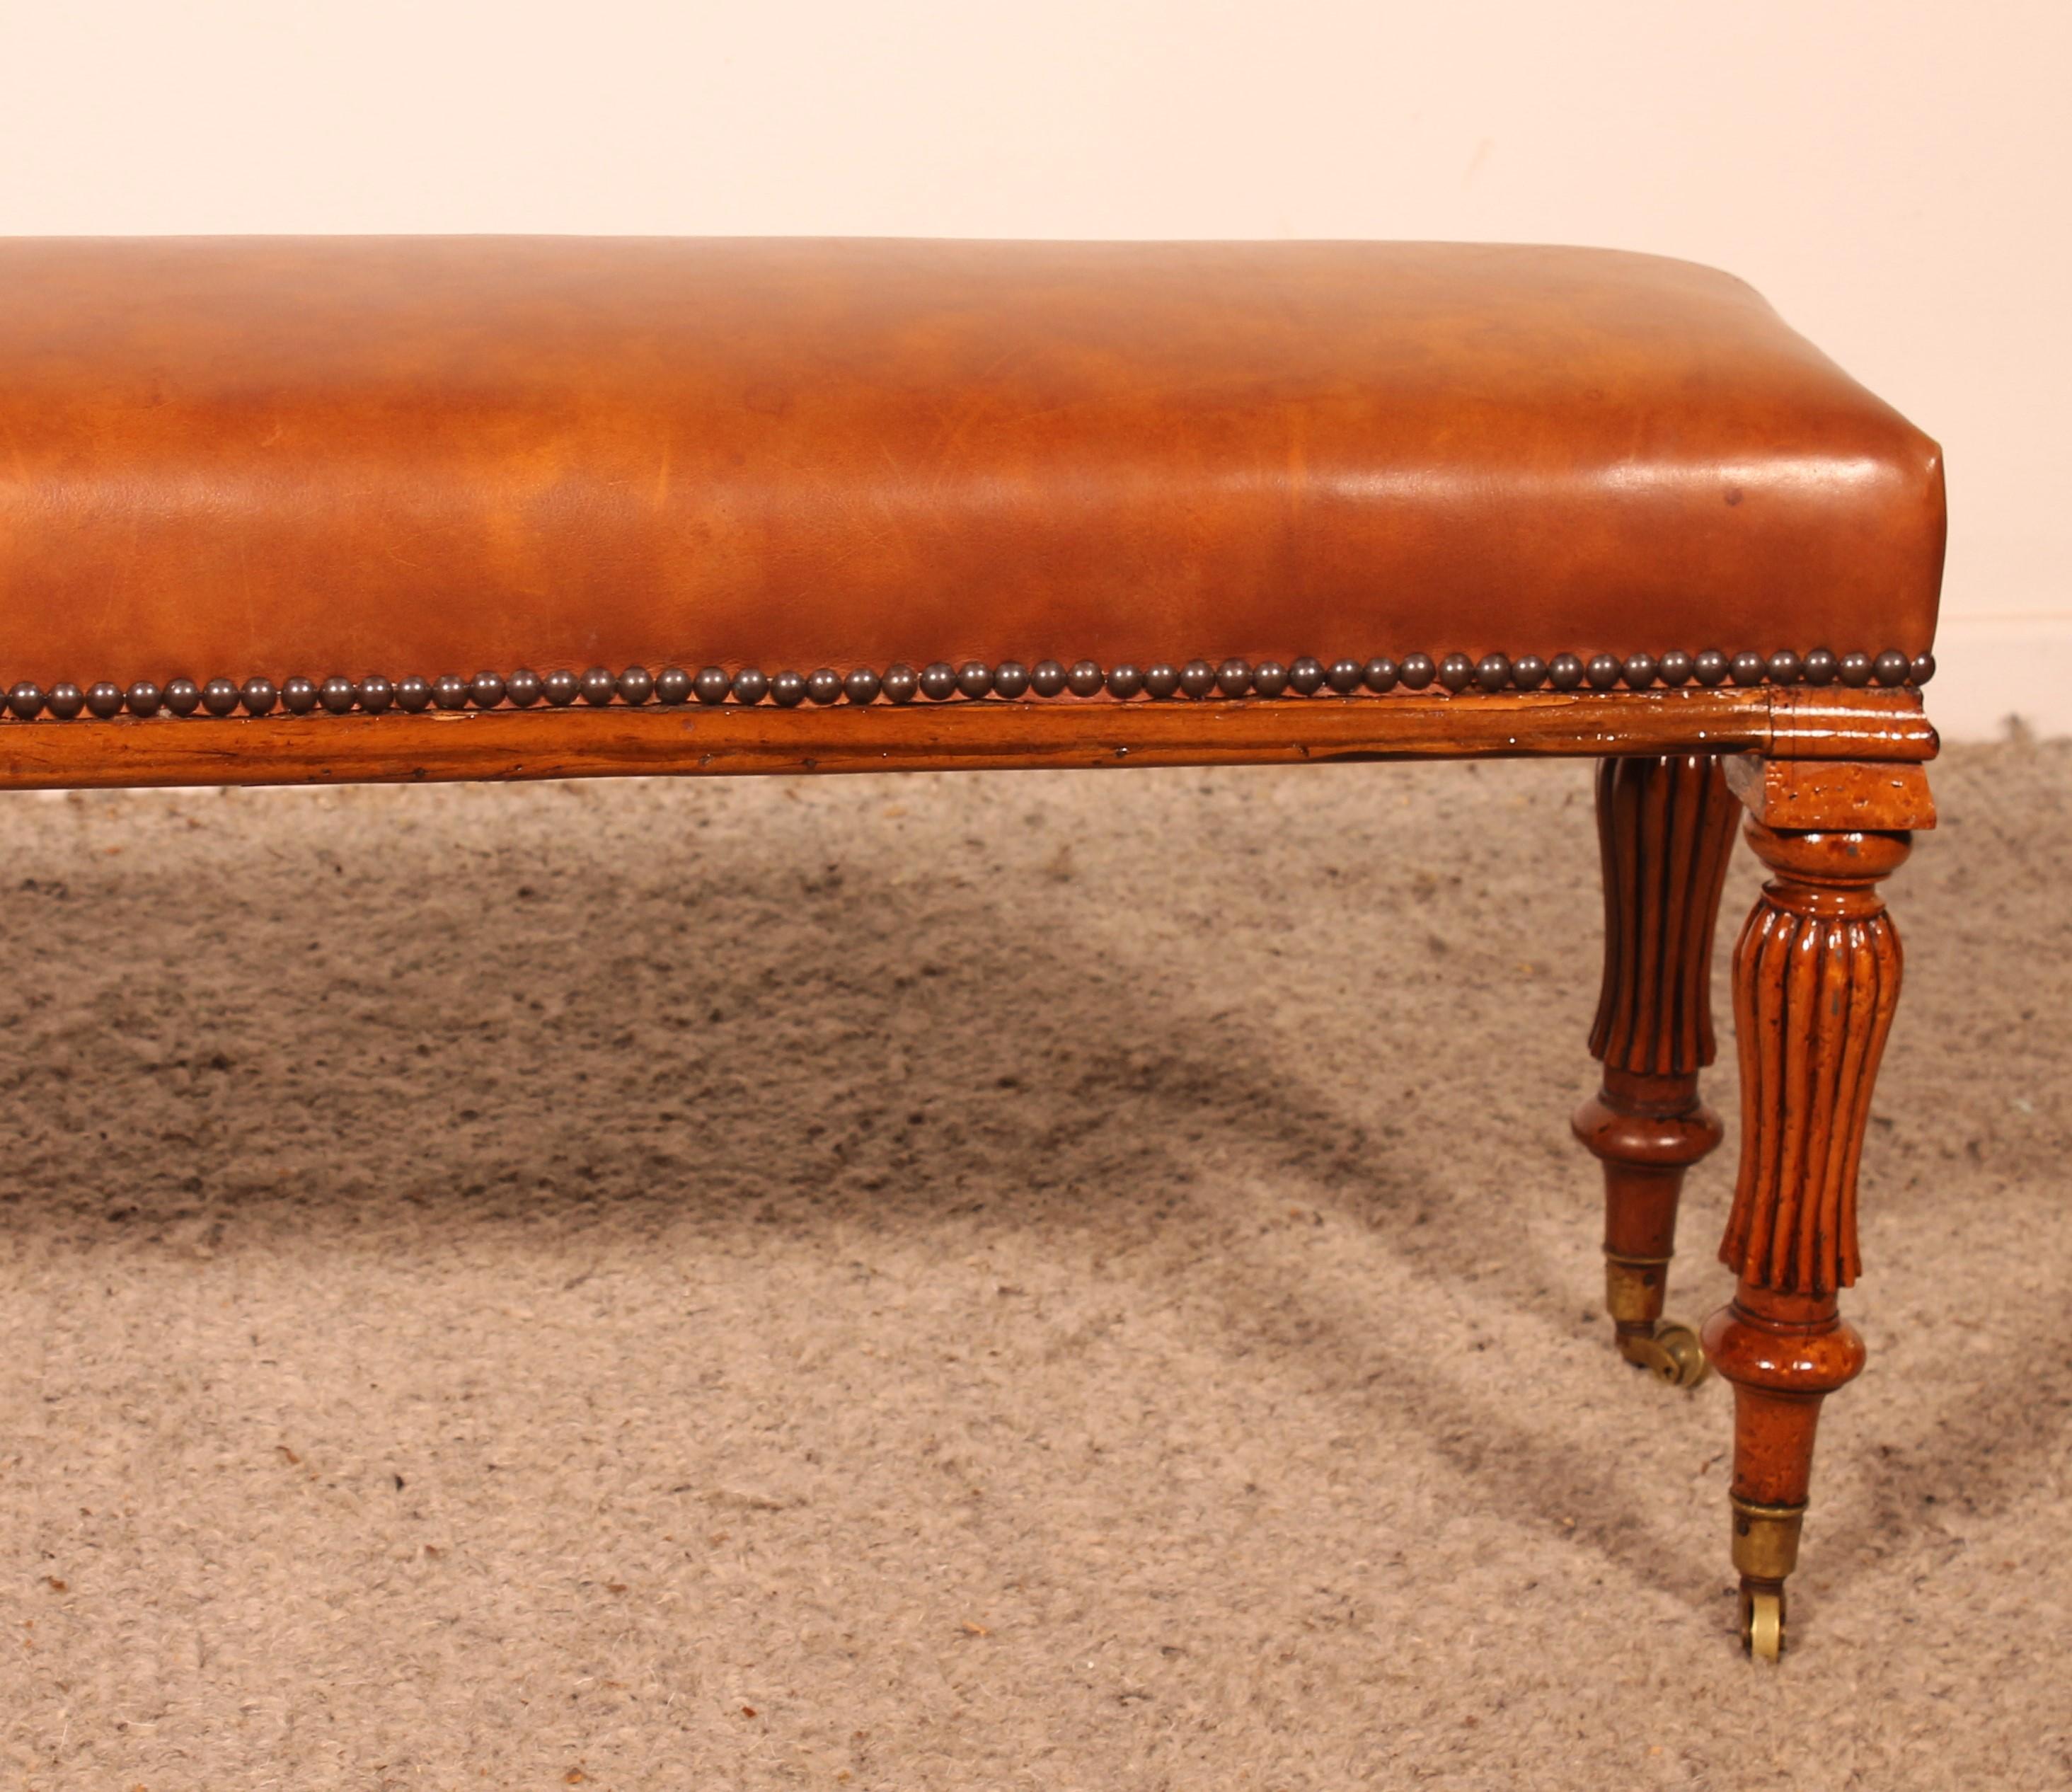 Lovely walnut bench from the 19th century from England
Very beautiful walnut base ending with casters
The bench seat has been covered in cognac-colored leather
beautiful patina and in perfect condition
ideal in front of a fire for example